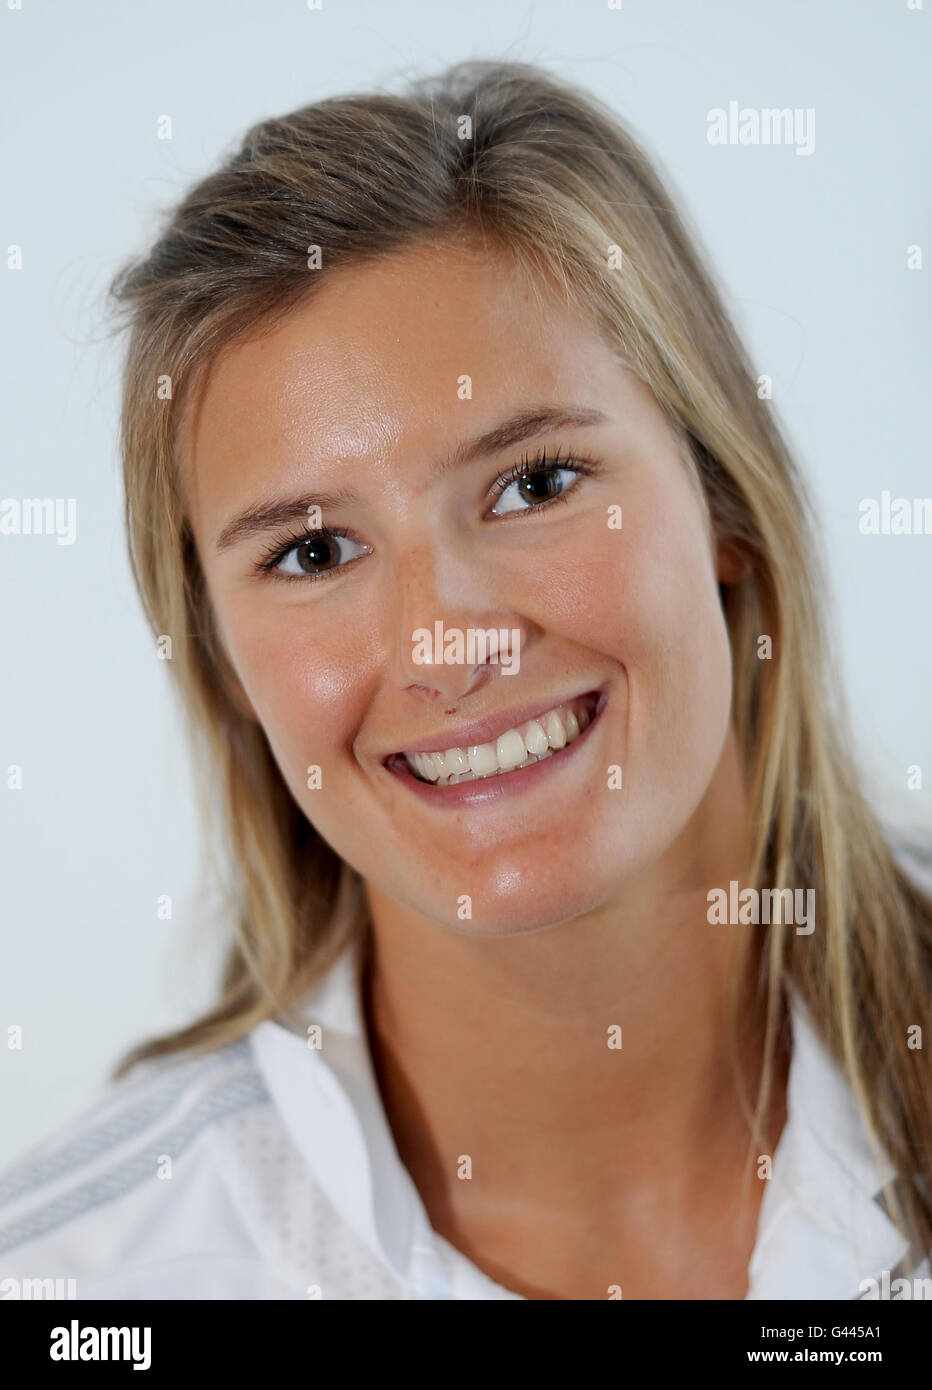 British beach volleyball Olympian Zara Dampney poses for media during an interview session ahead of the World Tour which begins in Brazil, London. Stock Photo